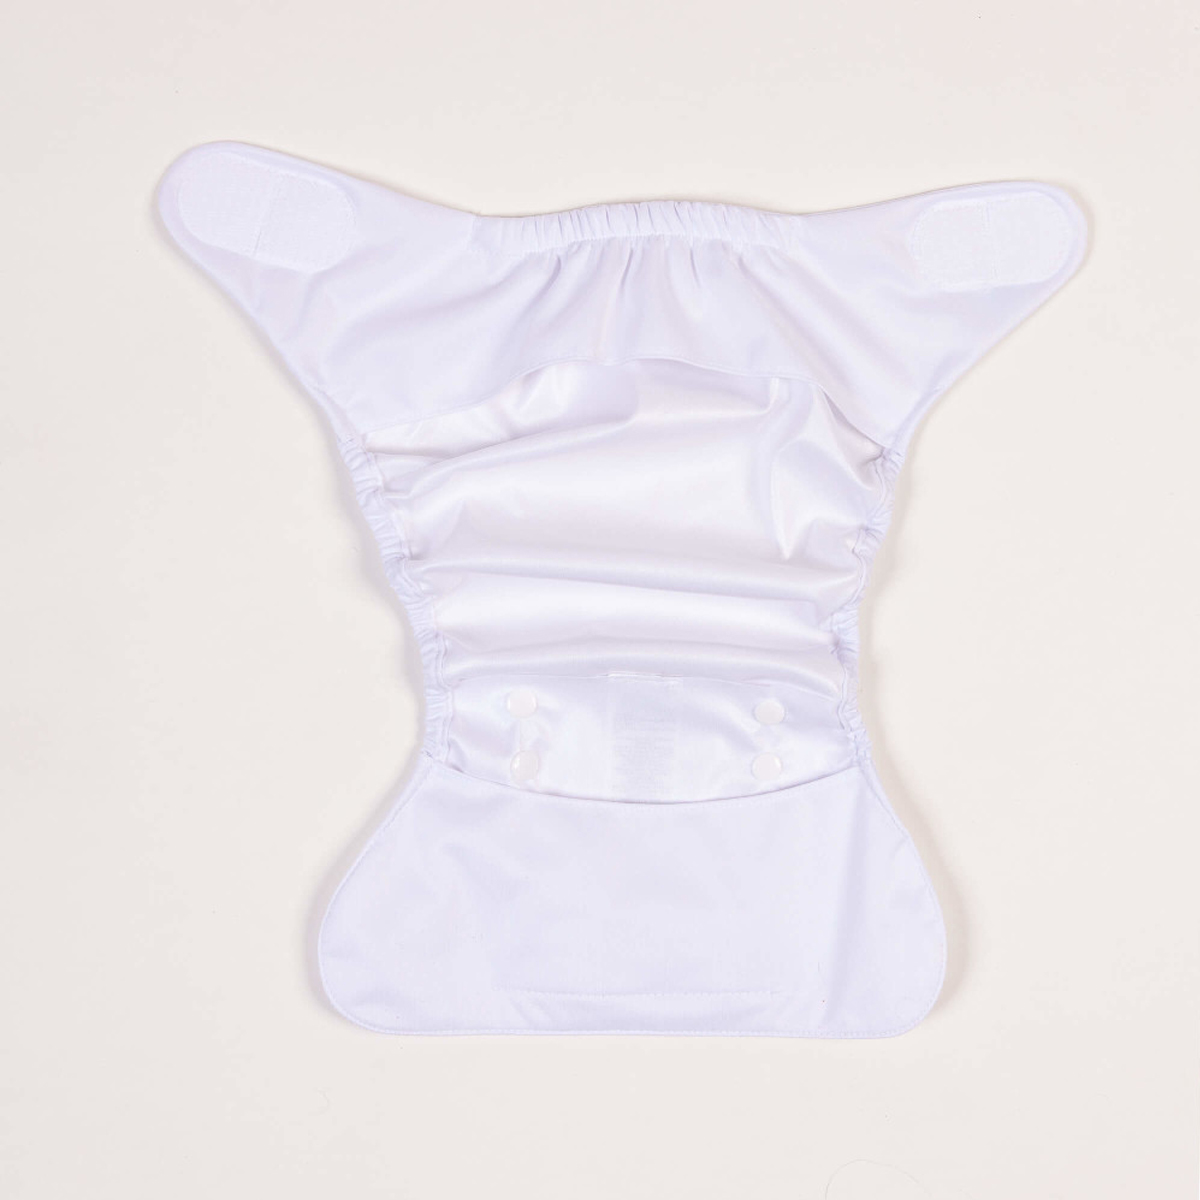 White Bamboozle Nappy Wrap - 0-15lbs - Peace With The Wild